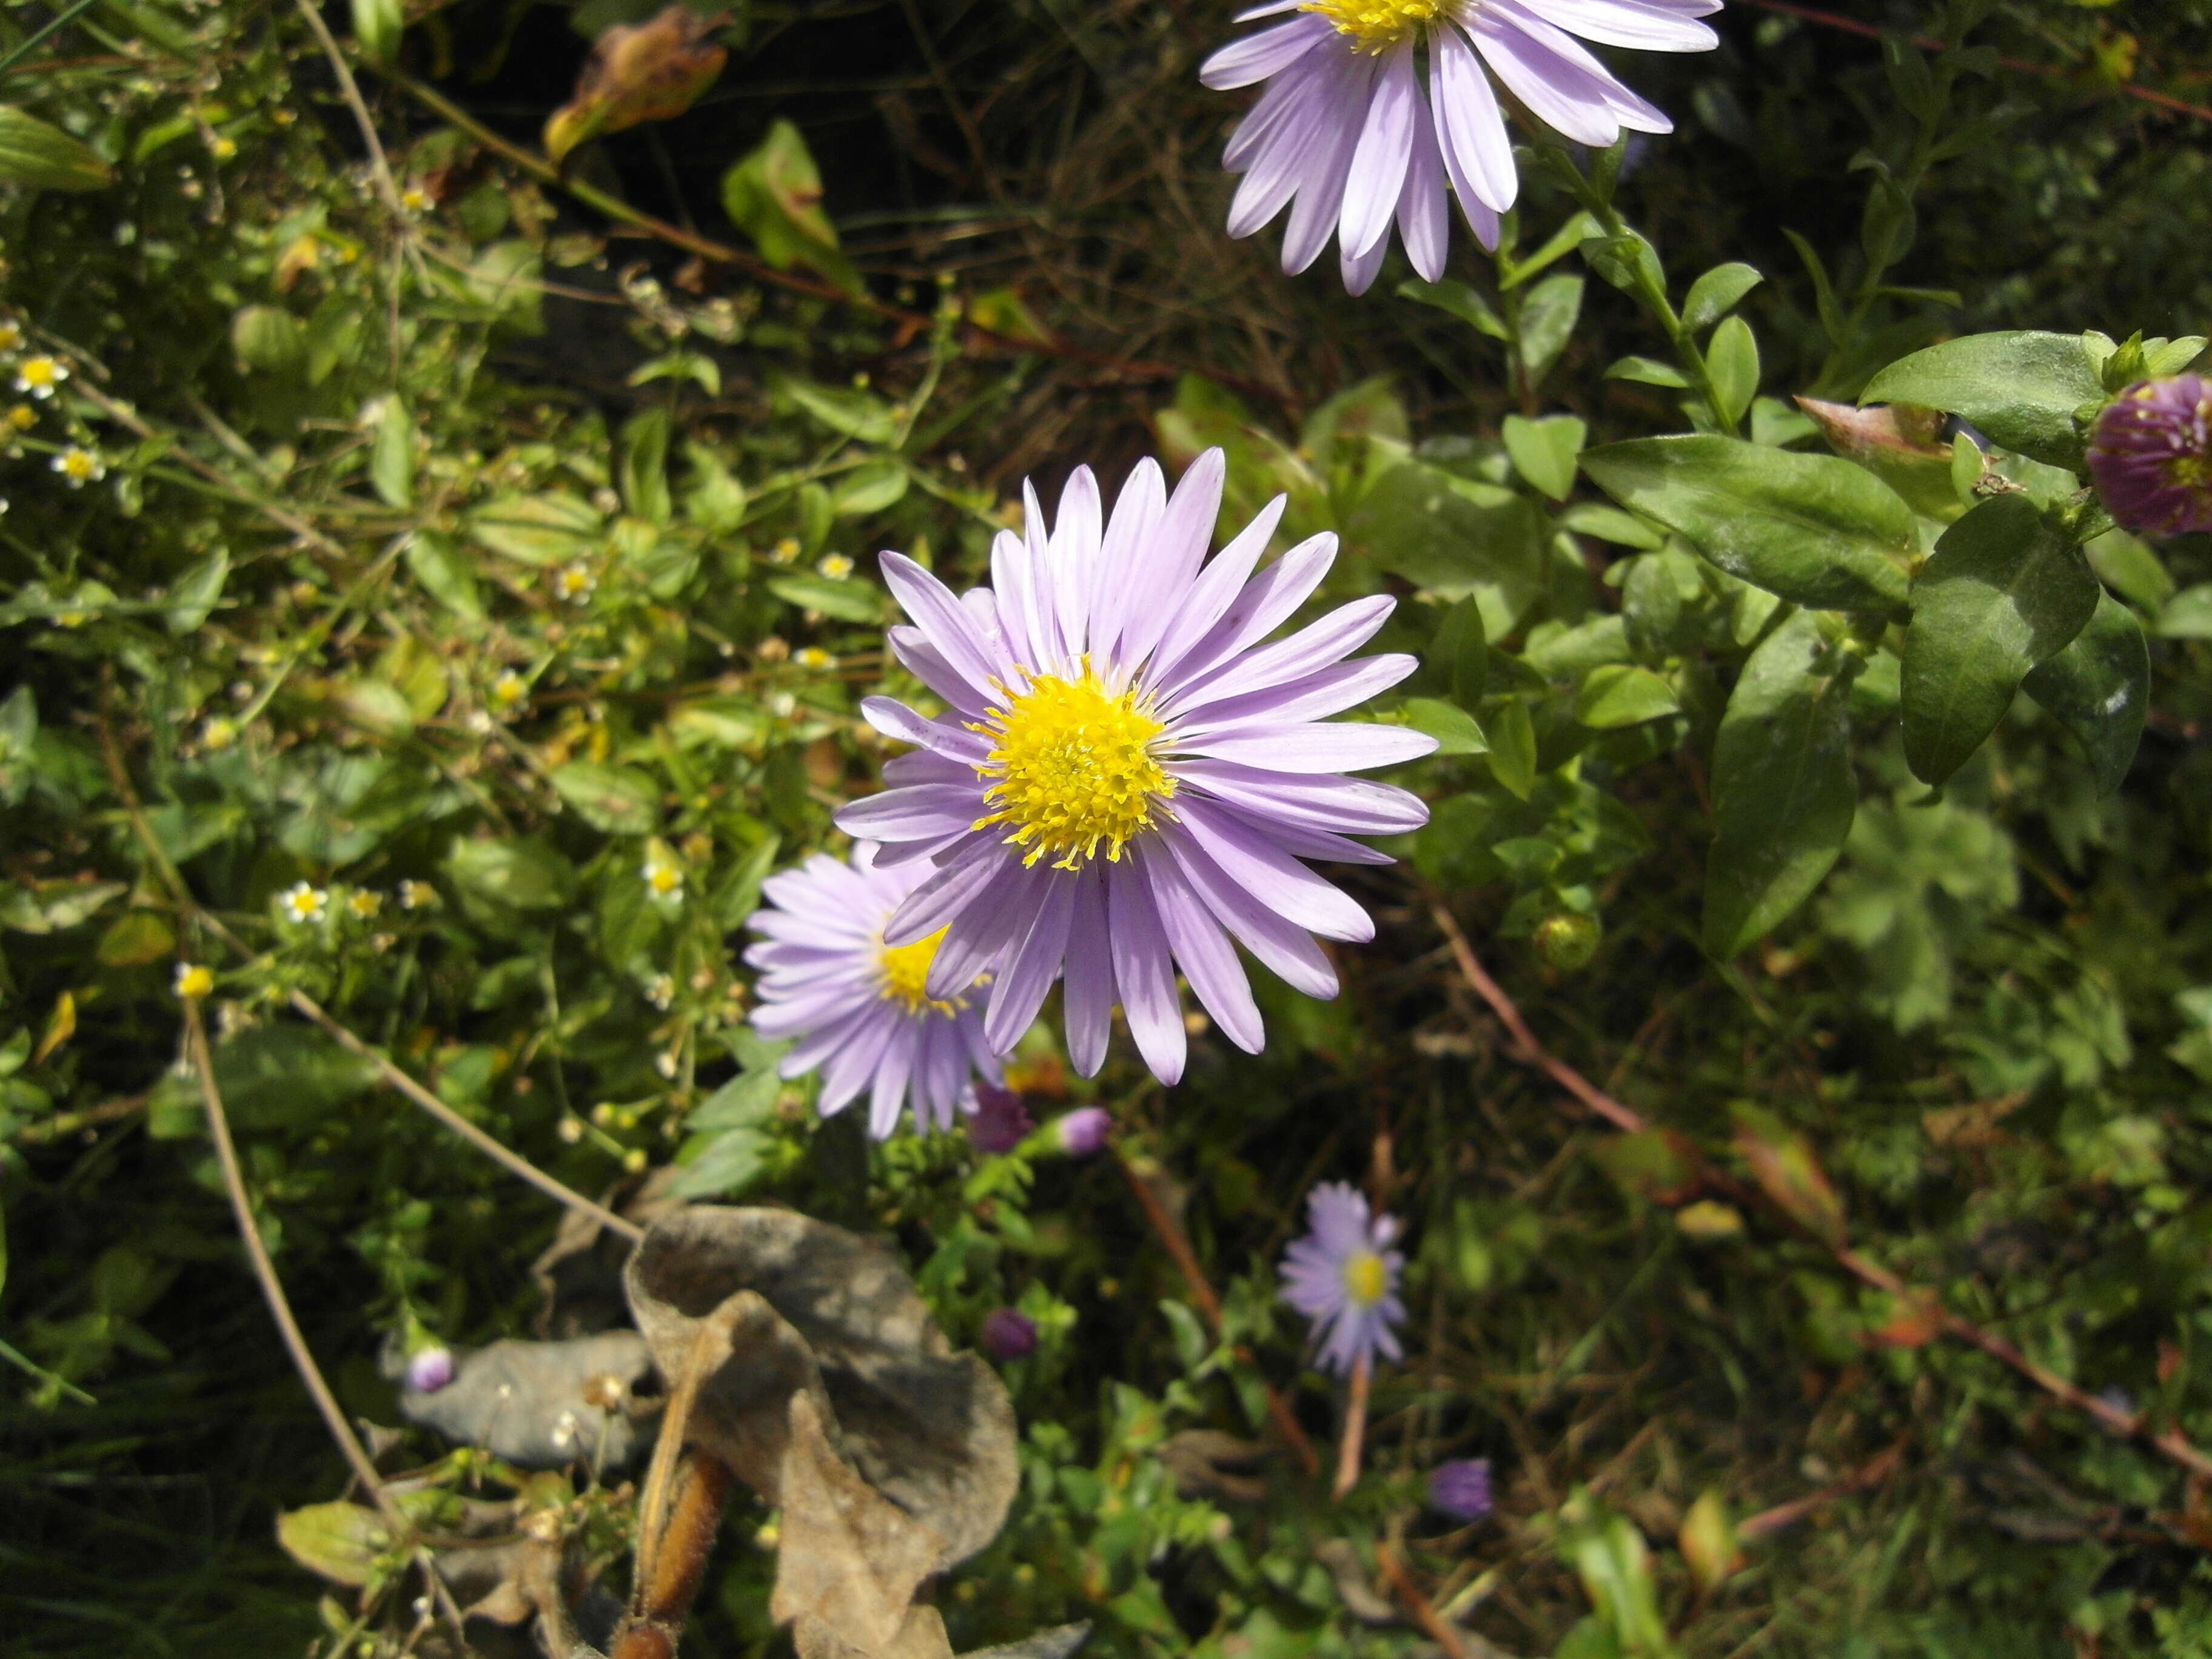 Image of New York aster